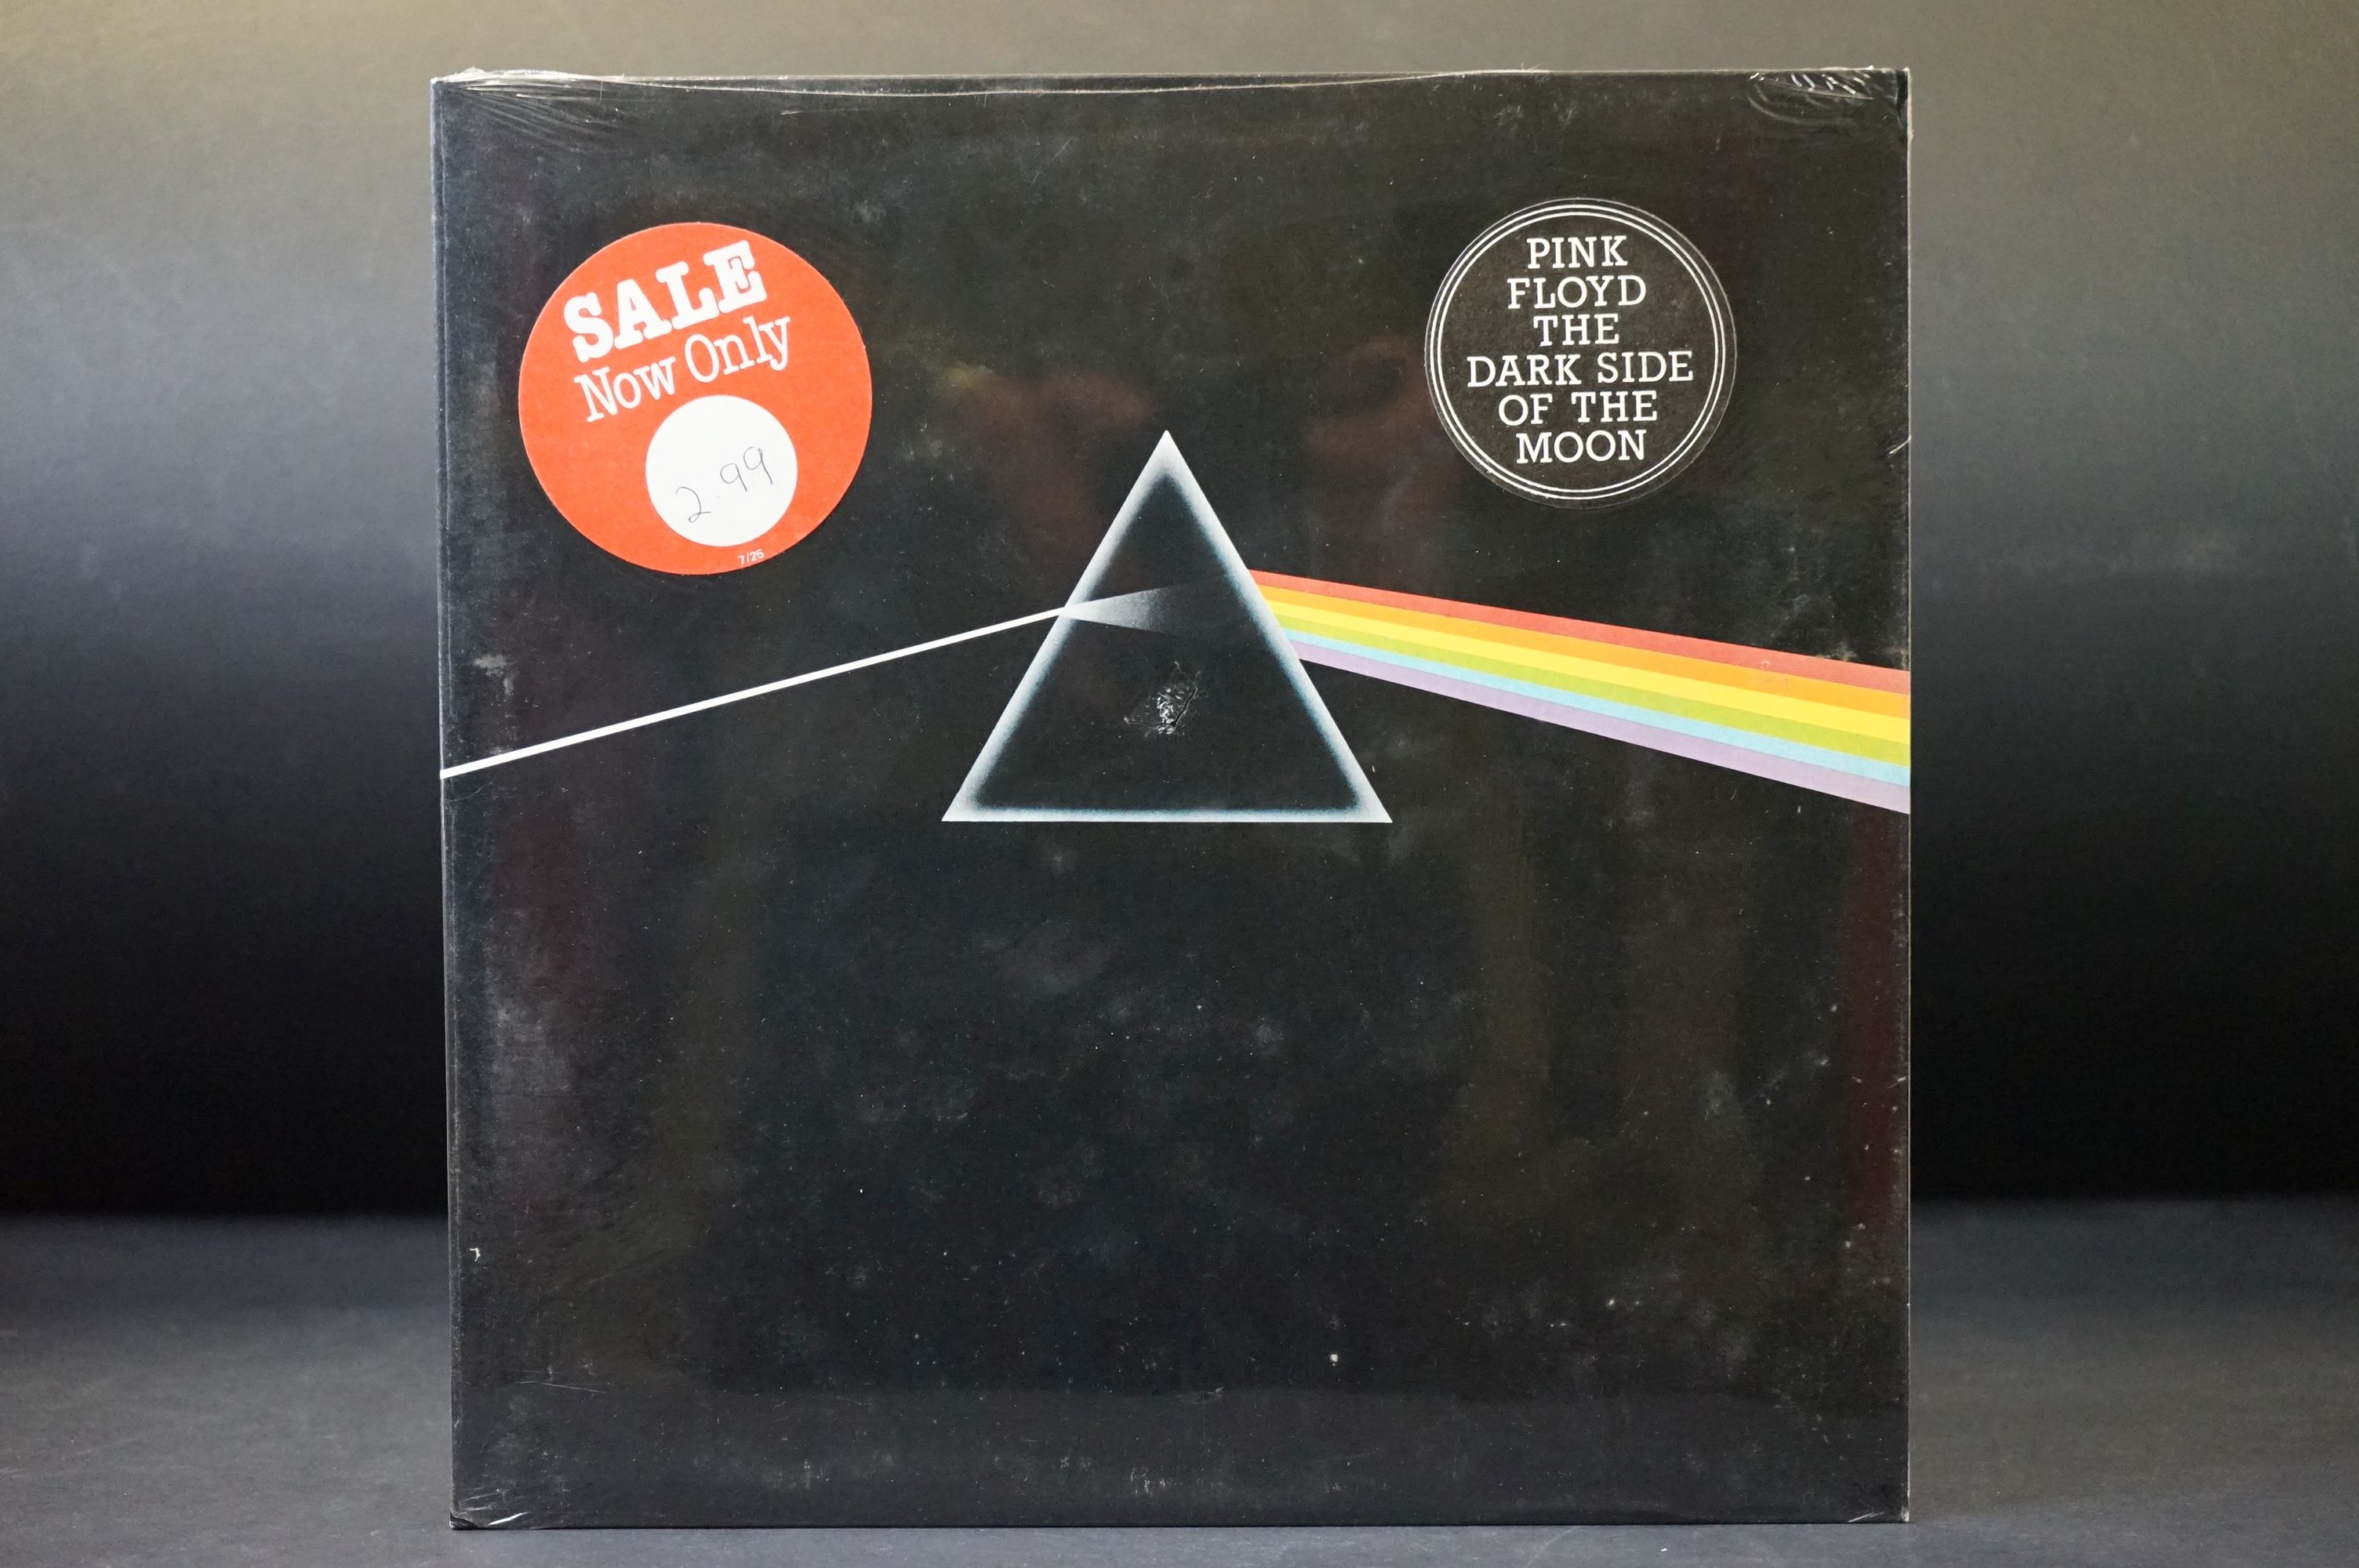 Vinyl - Pink Floyd Dark Side Of The Moon on Harvest SHVL 804 early press sealed in shrink, with some